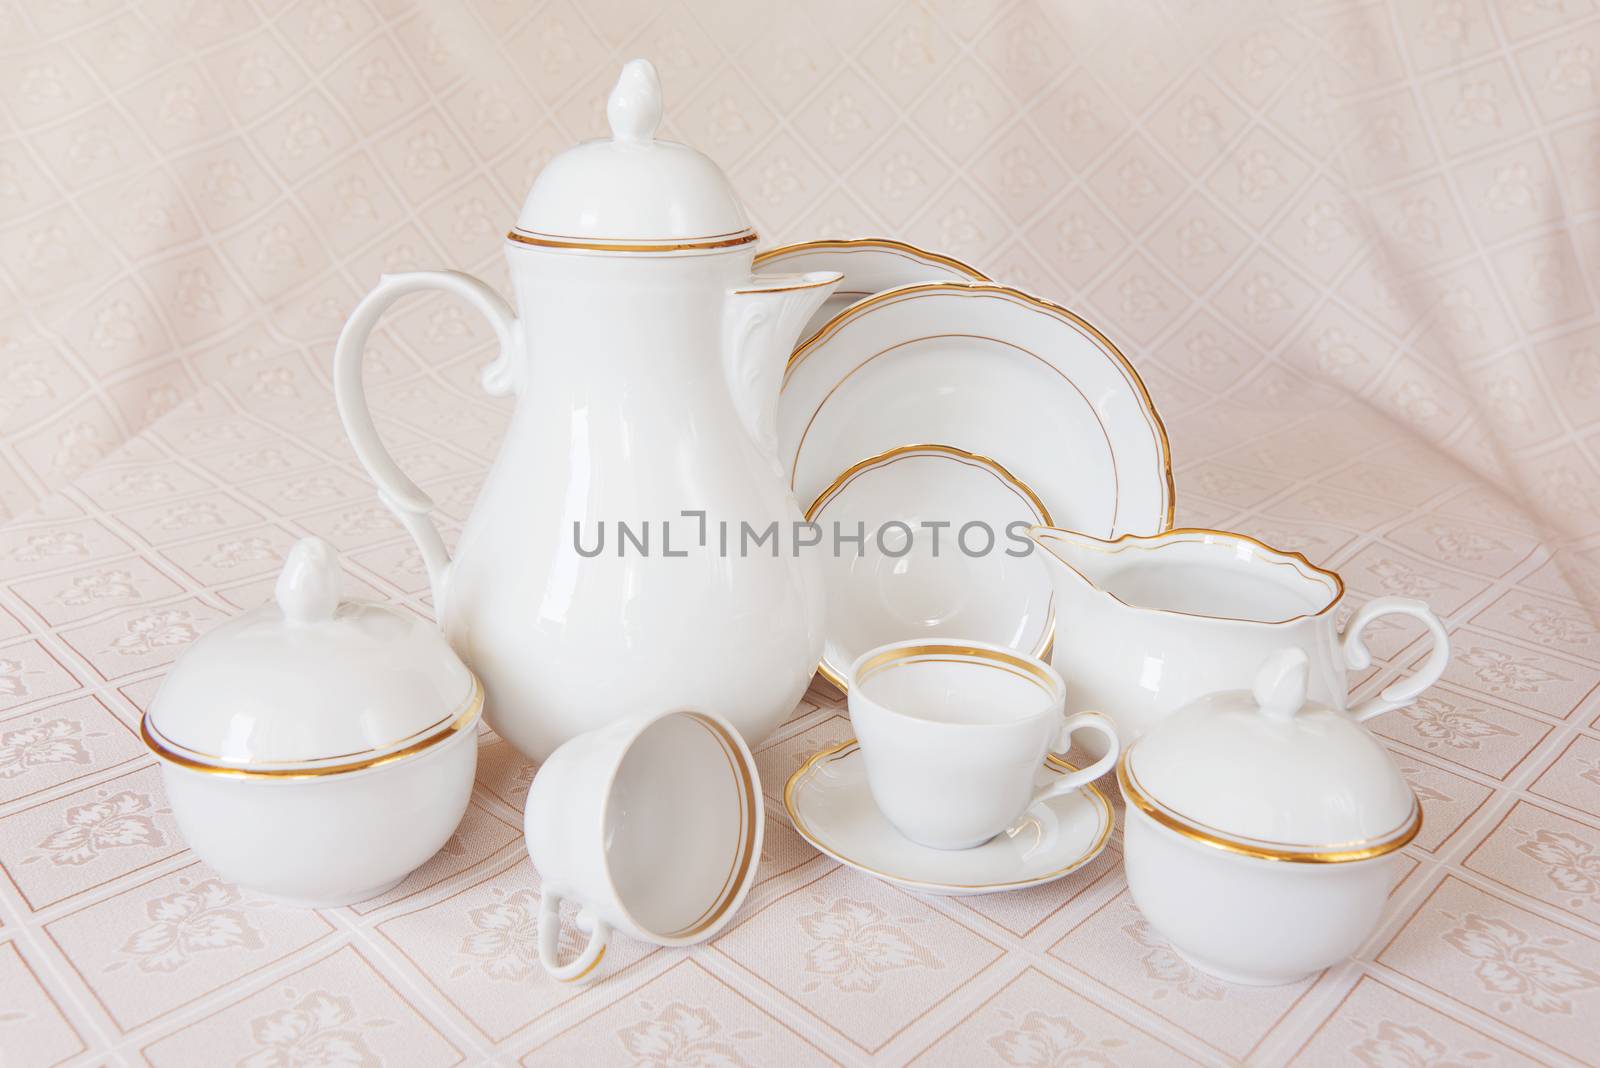 Classic white crockery for tea ore coffee: teapot, coffee pot, cup, serving plate, sugar bowl and creamer on a beautiful tablecloths